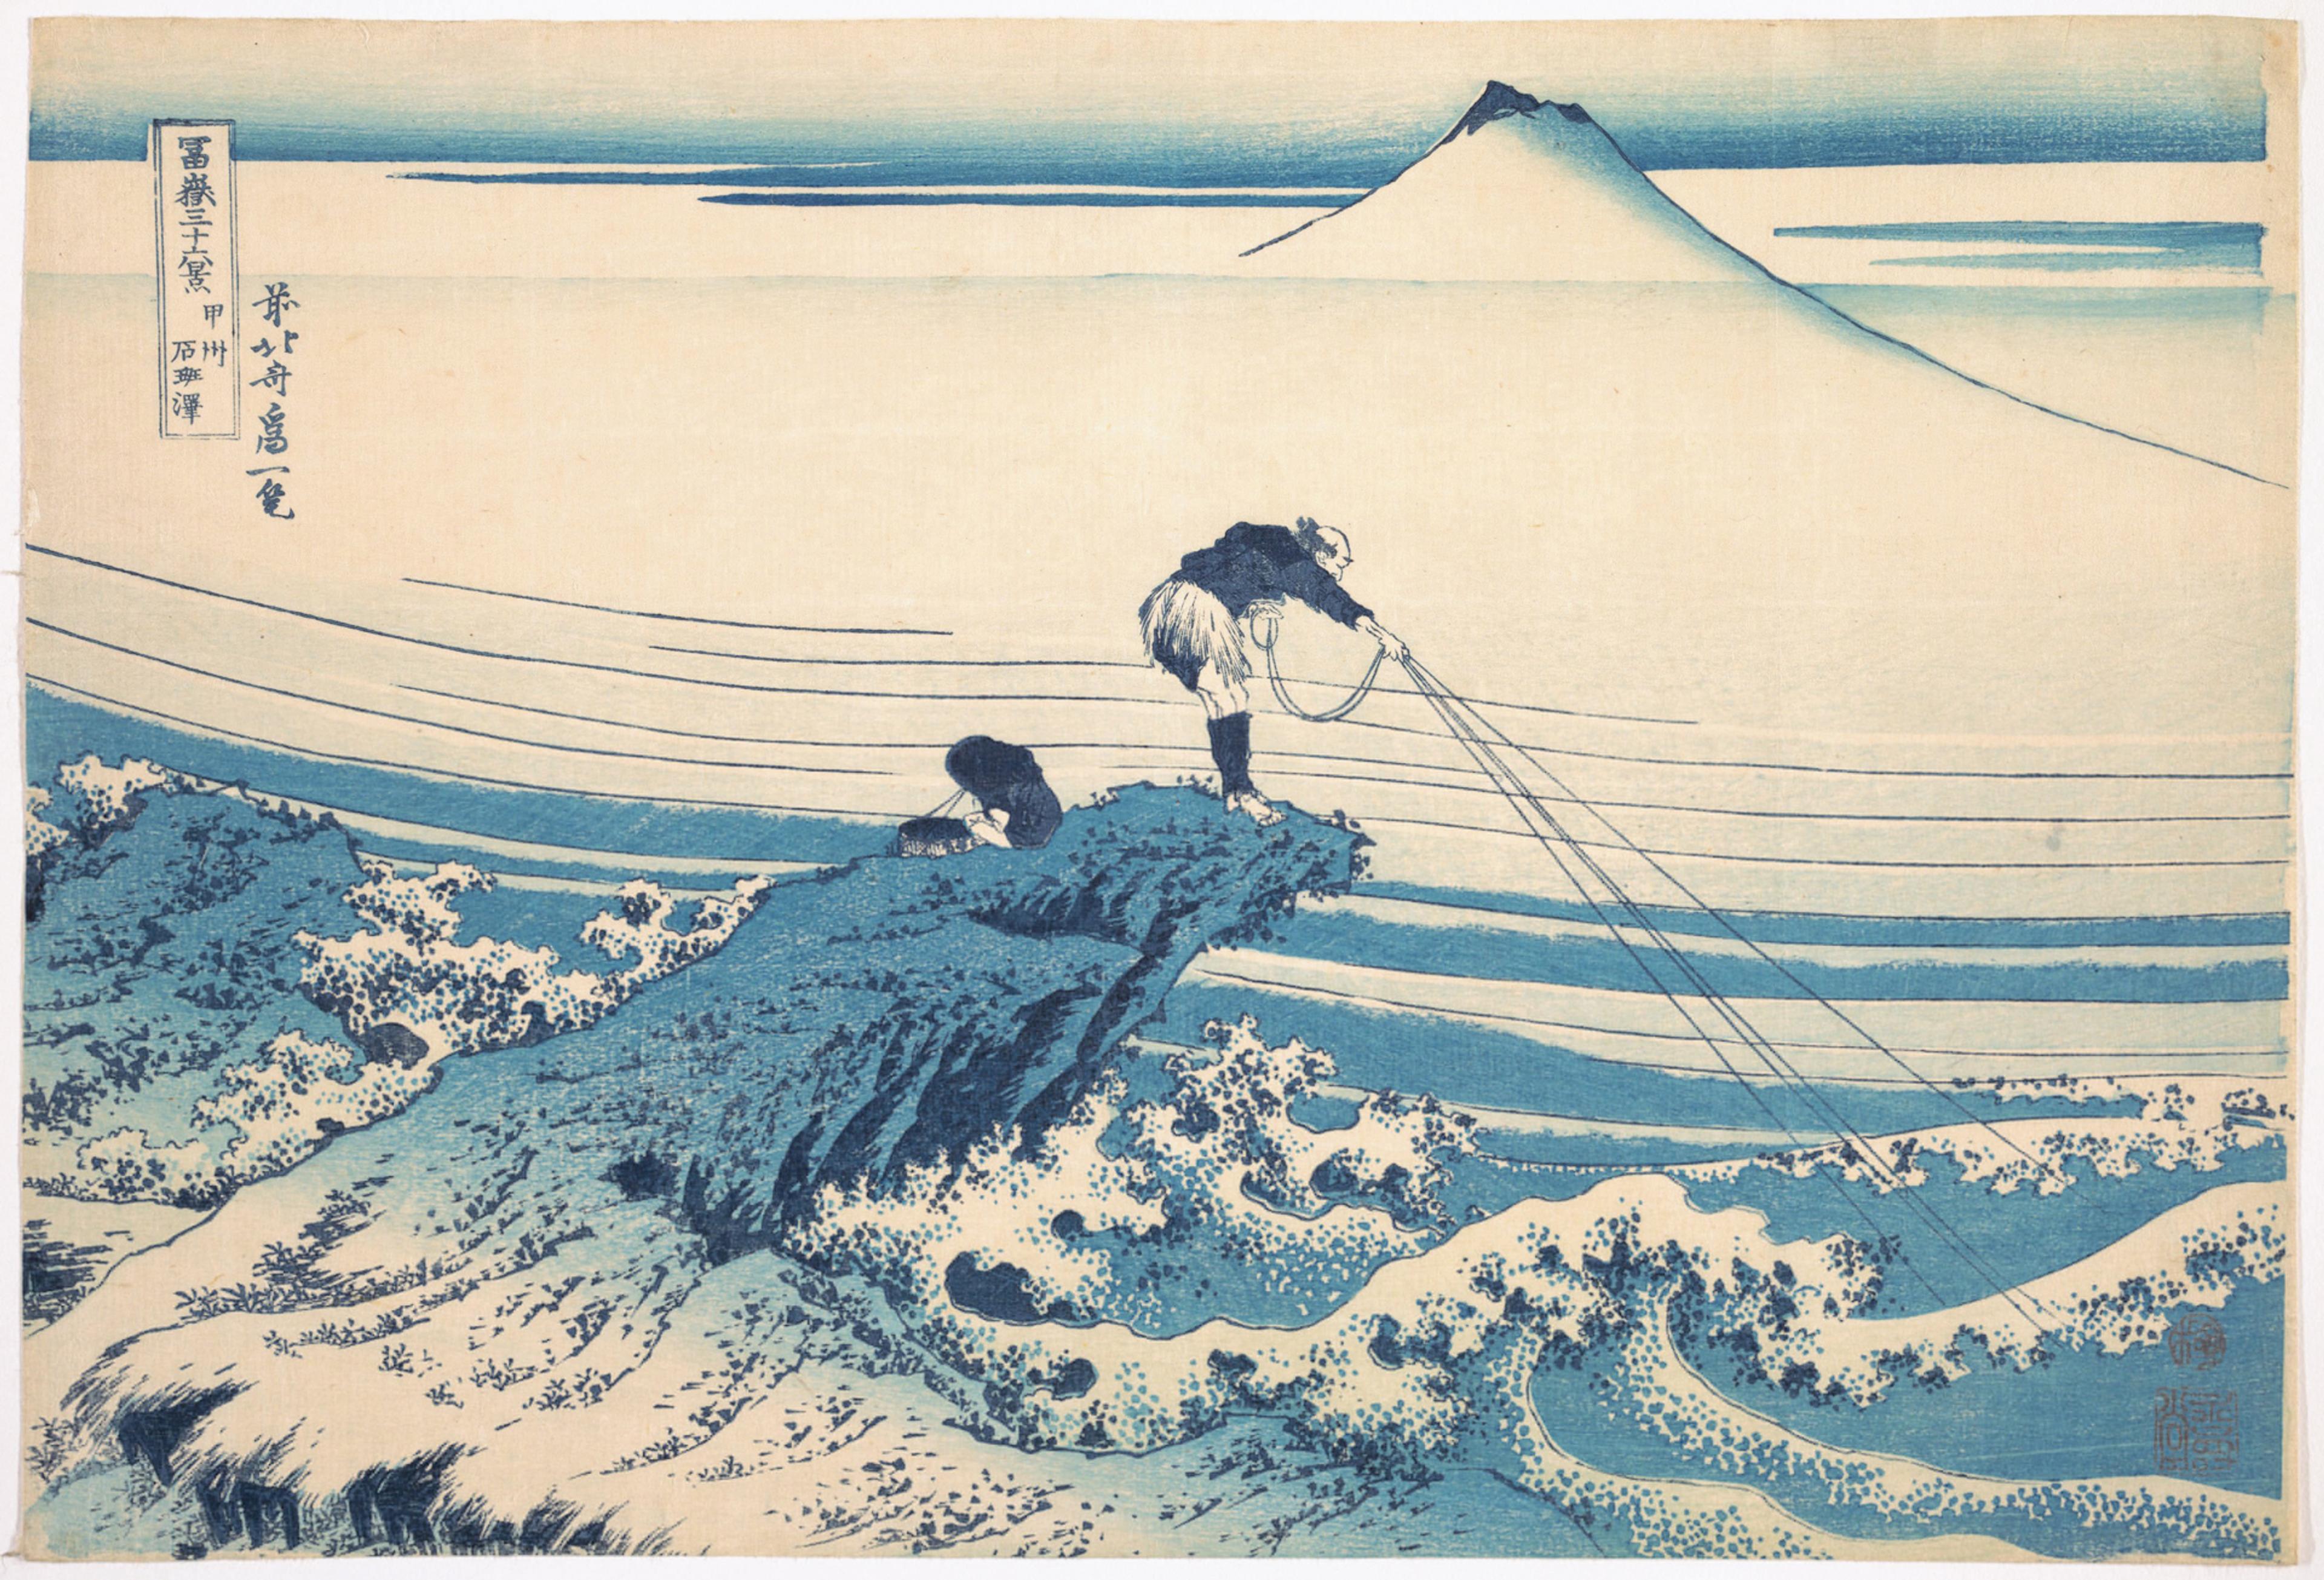 Japanese woodcut print of a fisherman standing at the edge of a rock, casting their net into a turbulent sea. An imposing Mount Fuji looms large in the background. 